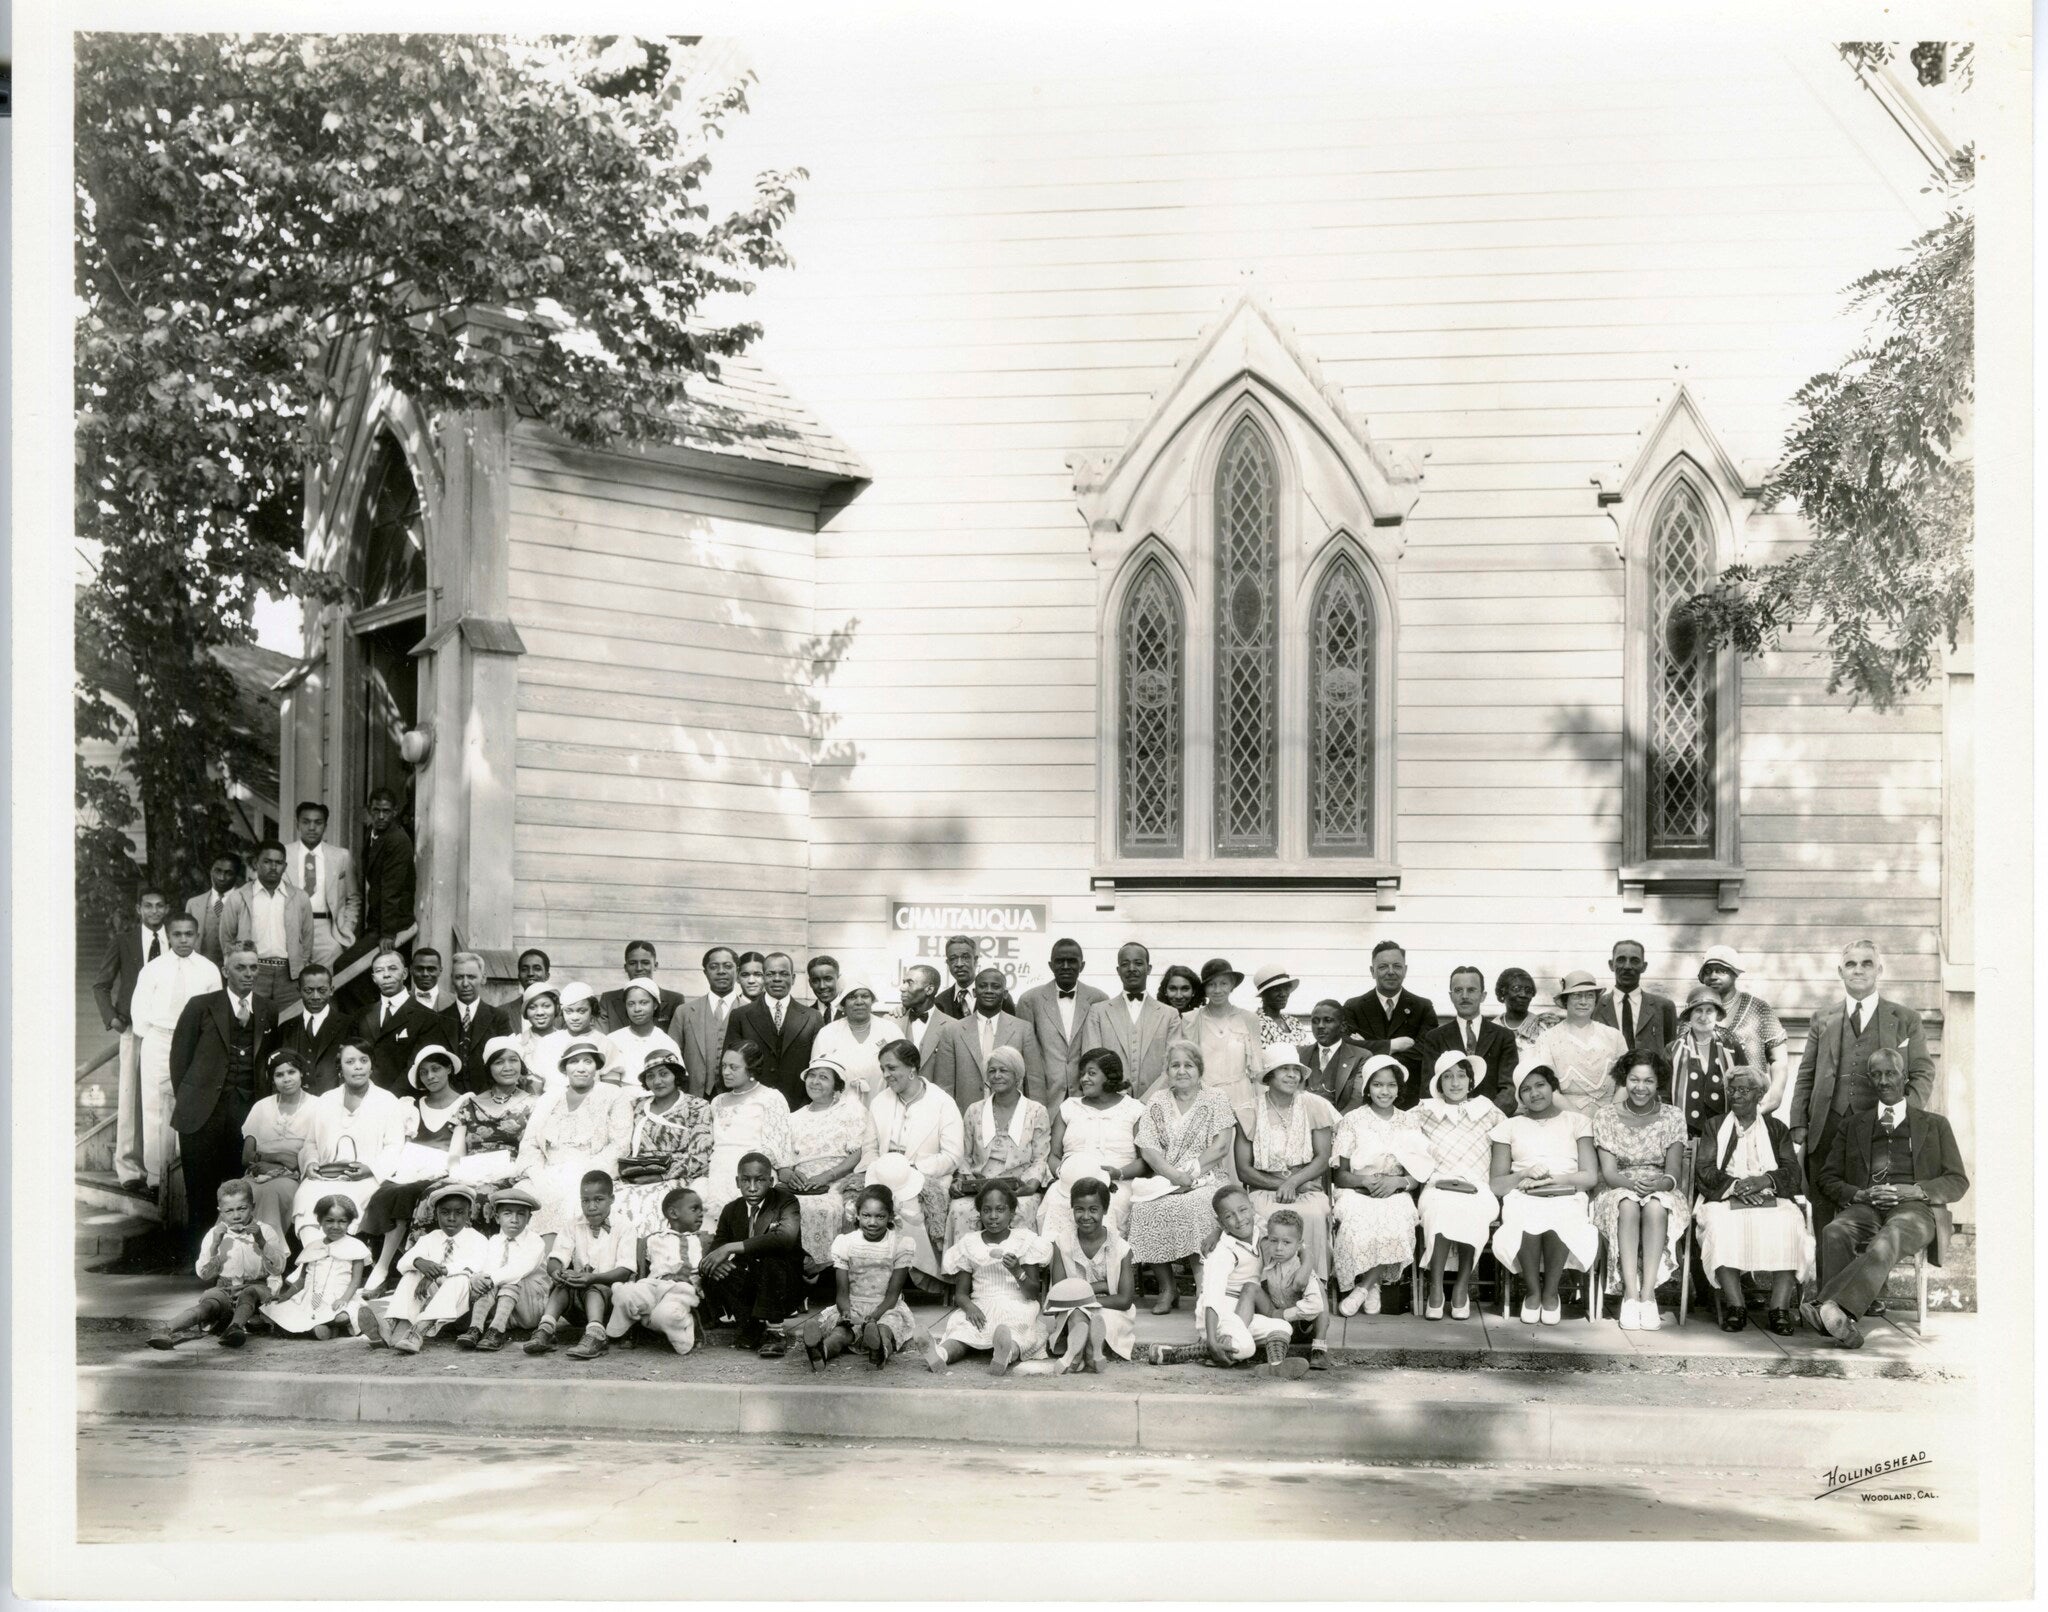 Group photo in front of church